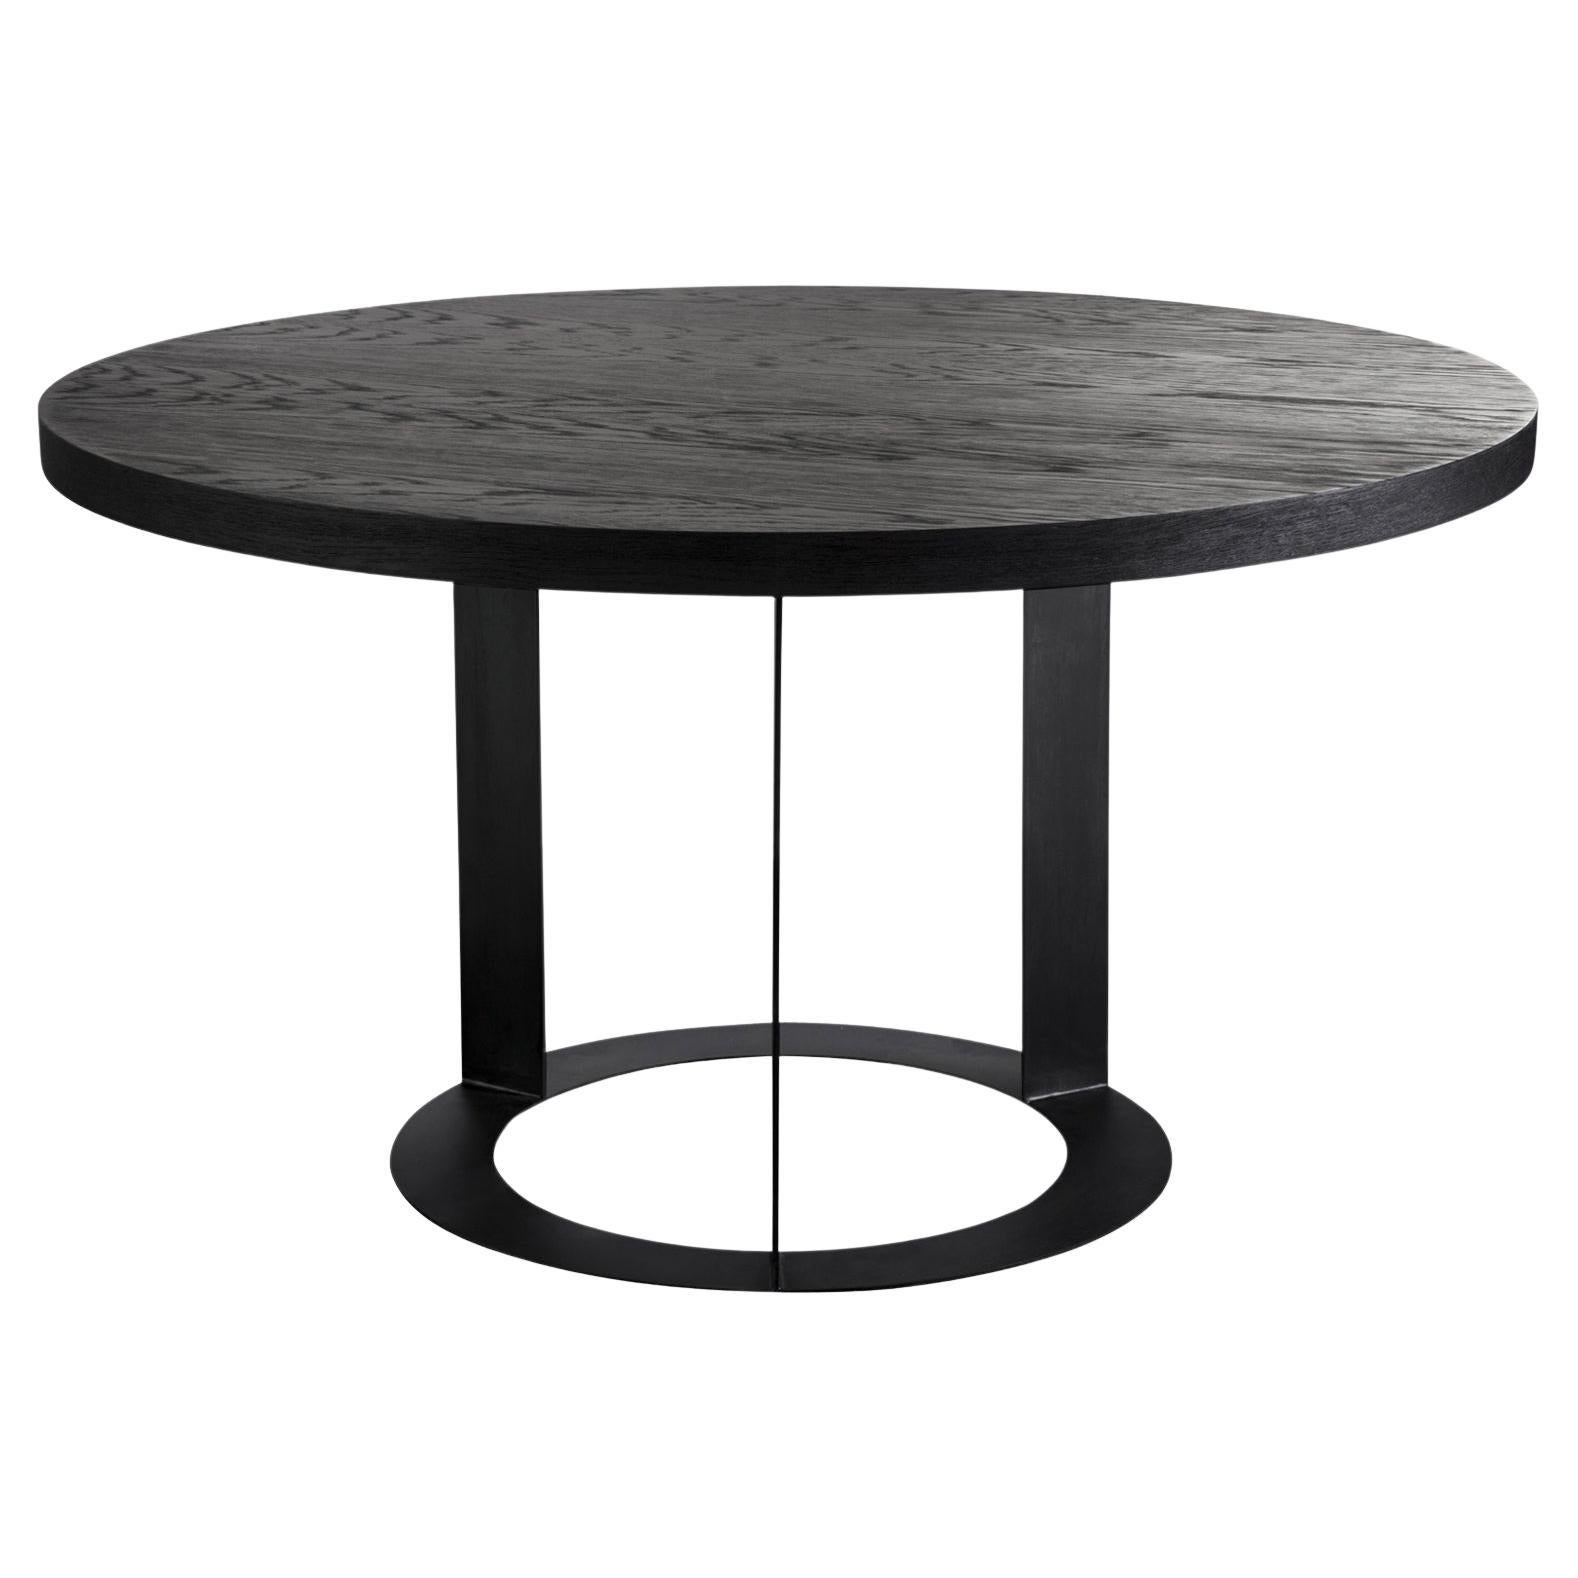 UnCubed Table For Sale